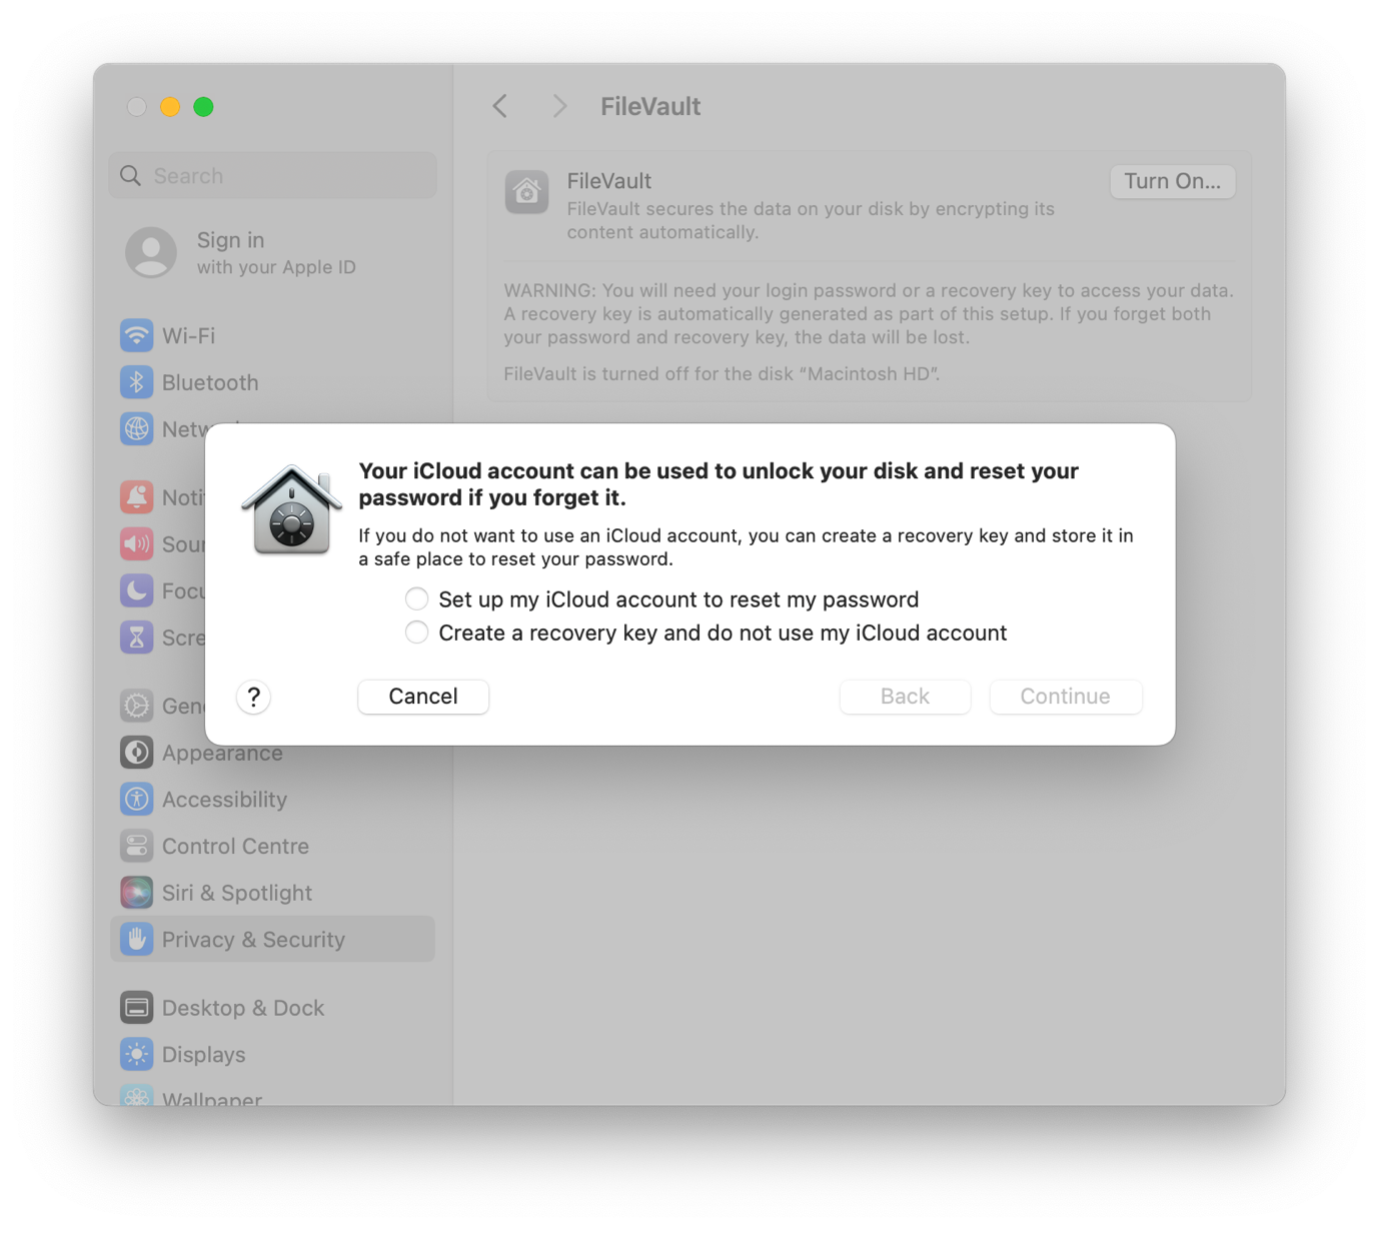 The recovery key dialogue box that appears when you turn on FileVault. It gives you the option to set up your iCloud account to reset your computer login password or to create a recovery key you can use to reset your password.